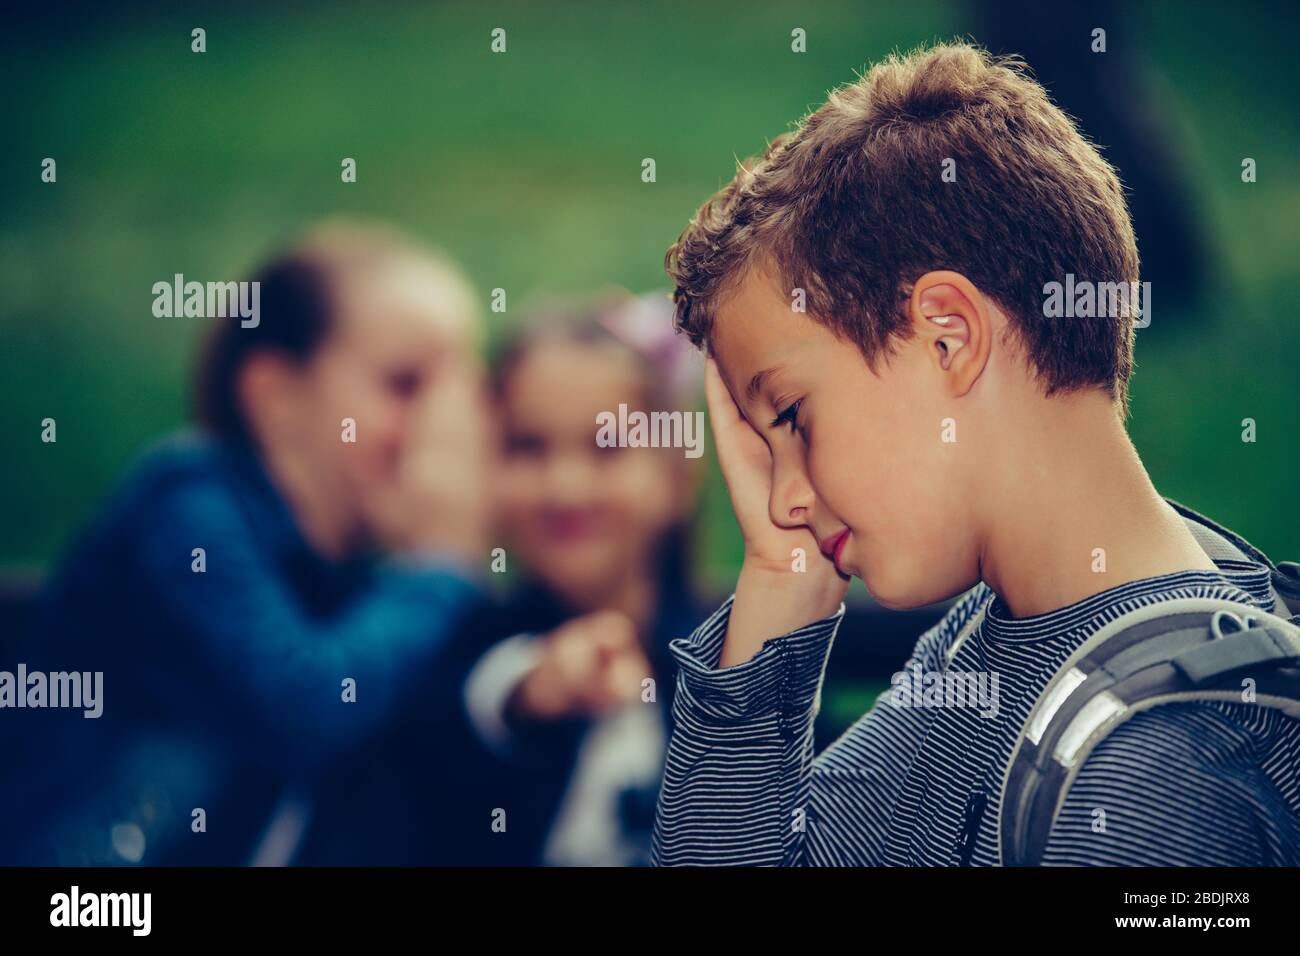 Little sad boy feeling left out, teased and bullied by his classmates. Unhappy boy having problems fitting in with others at school. Stock Photo